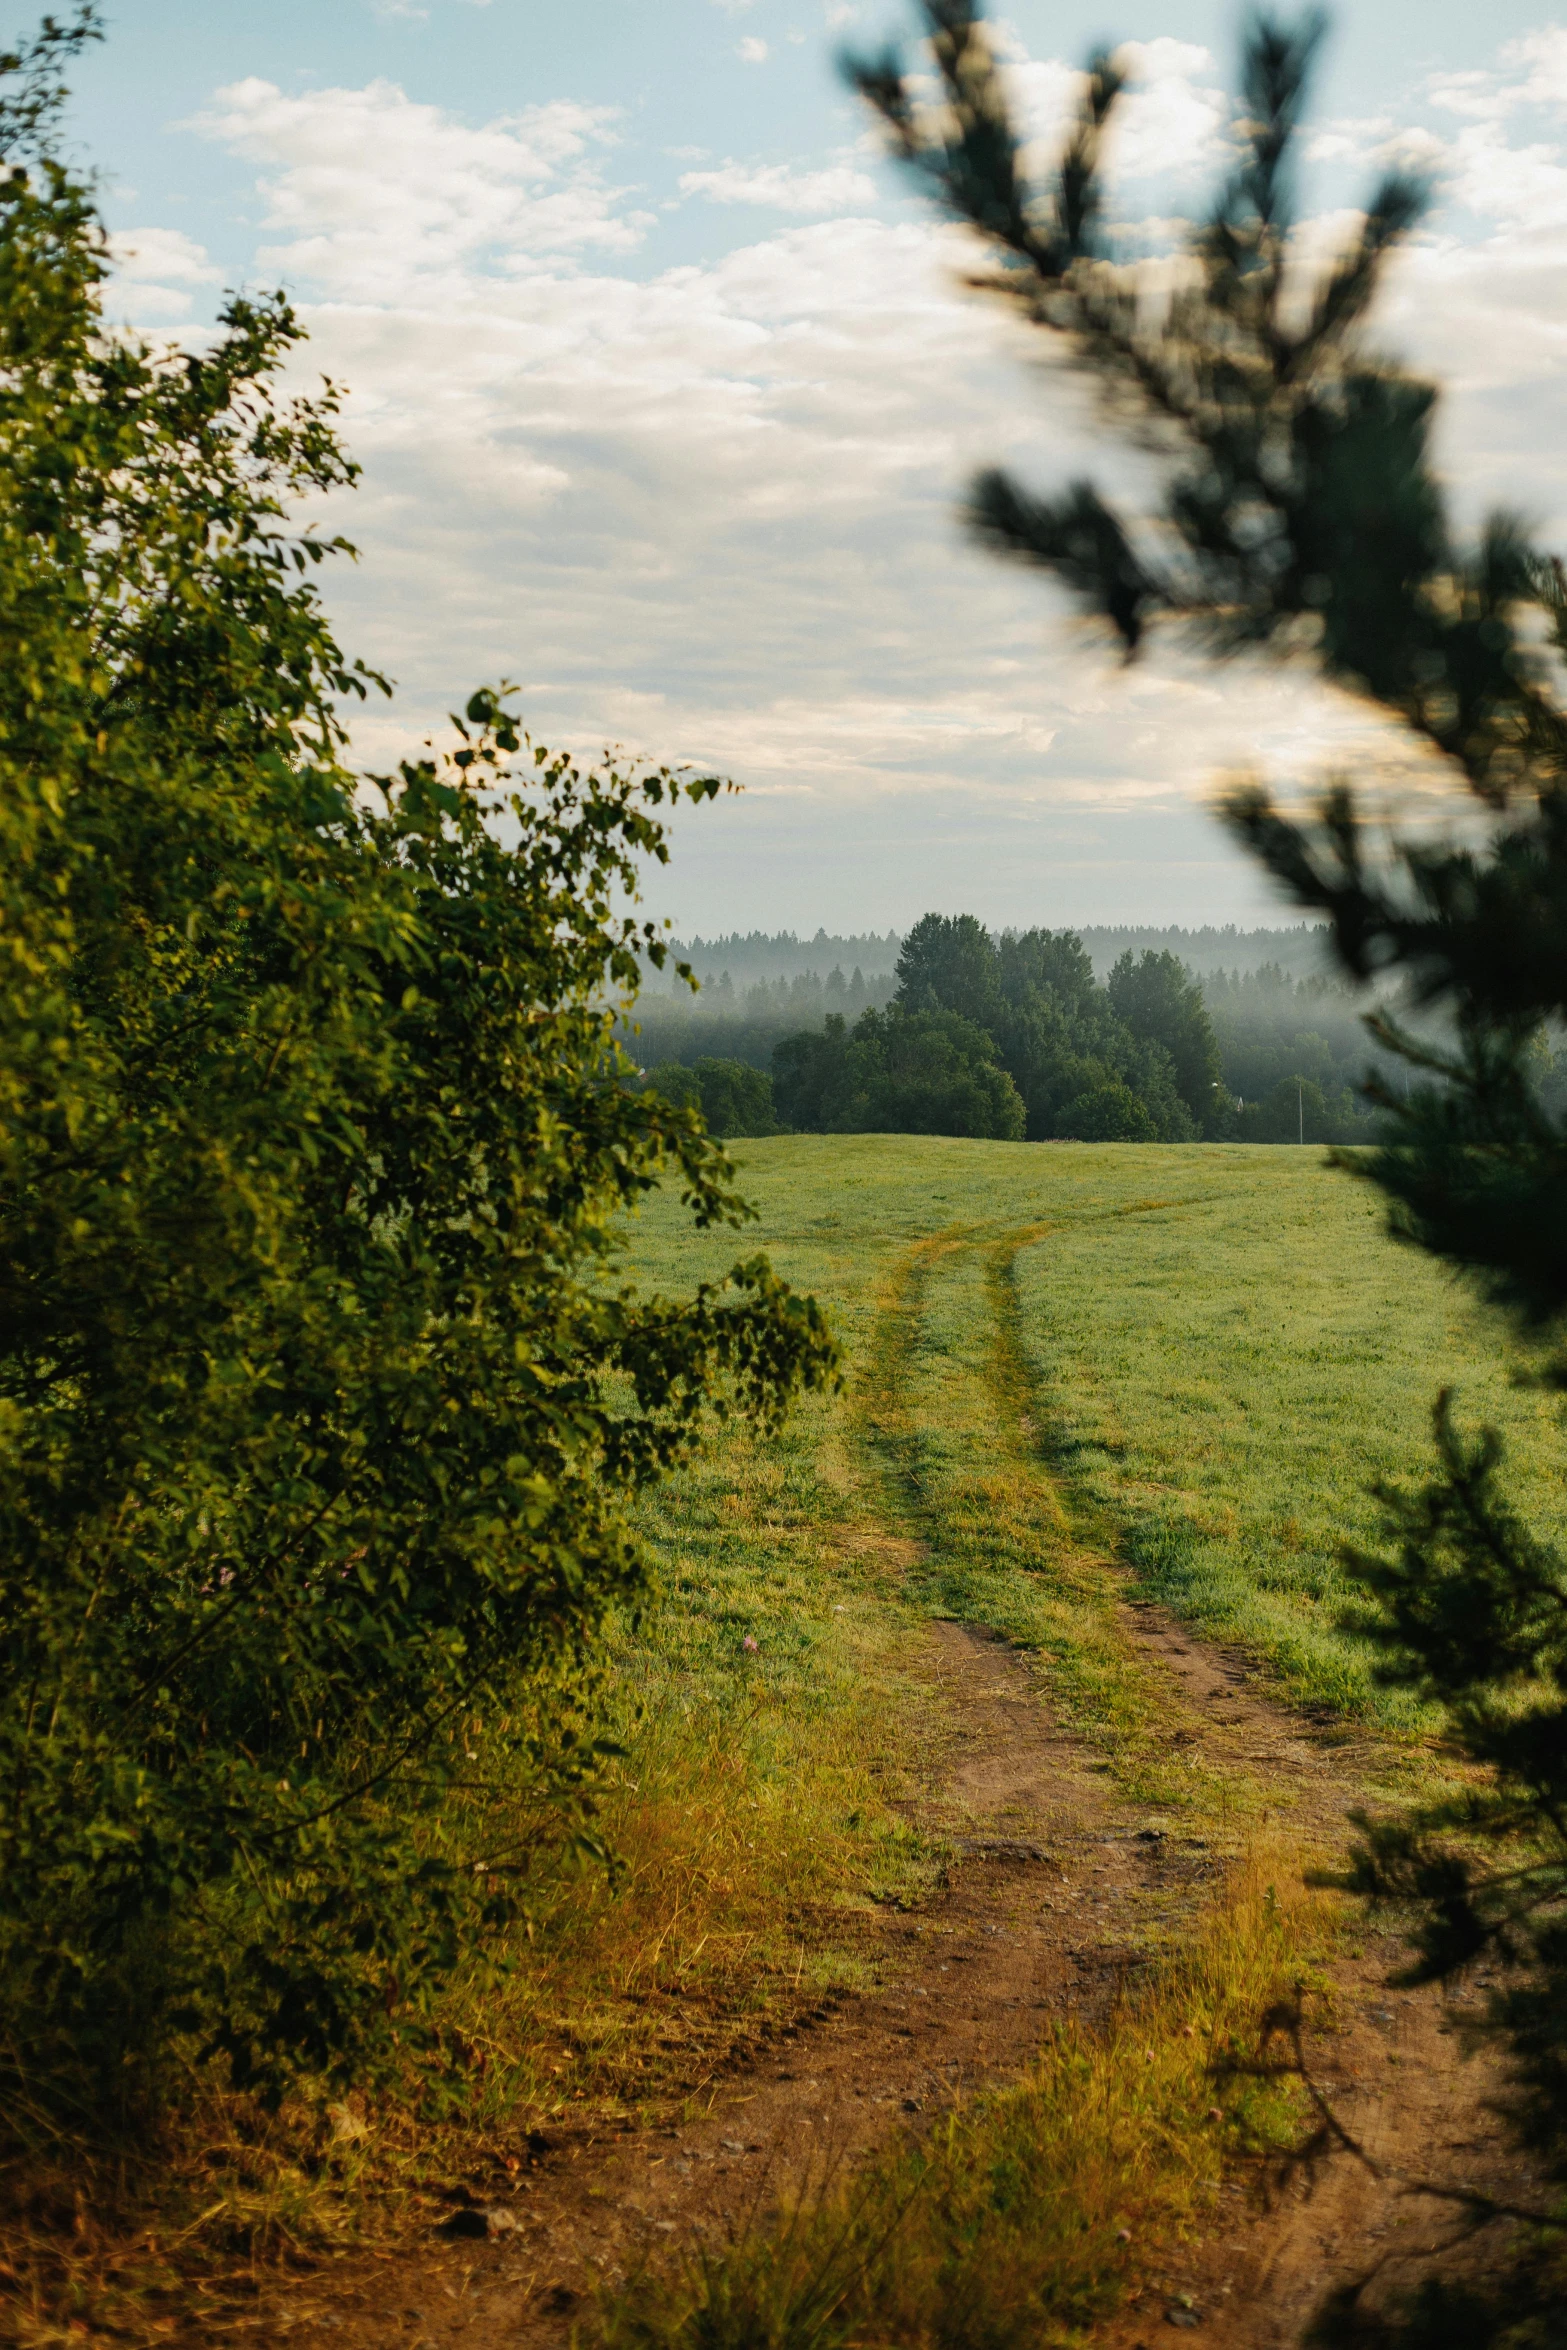 a dirt road running through a lush green field, a picture, inspired by Ivan Shishkin, unsplash, romanticism, late summer evening, grey forest in the background, view from distance, cottagecore